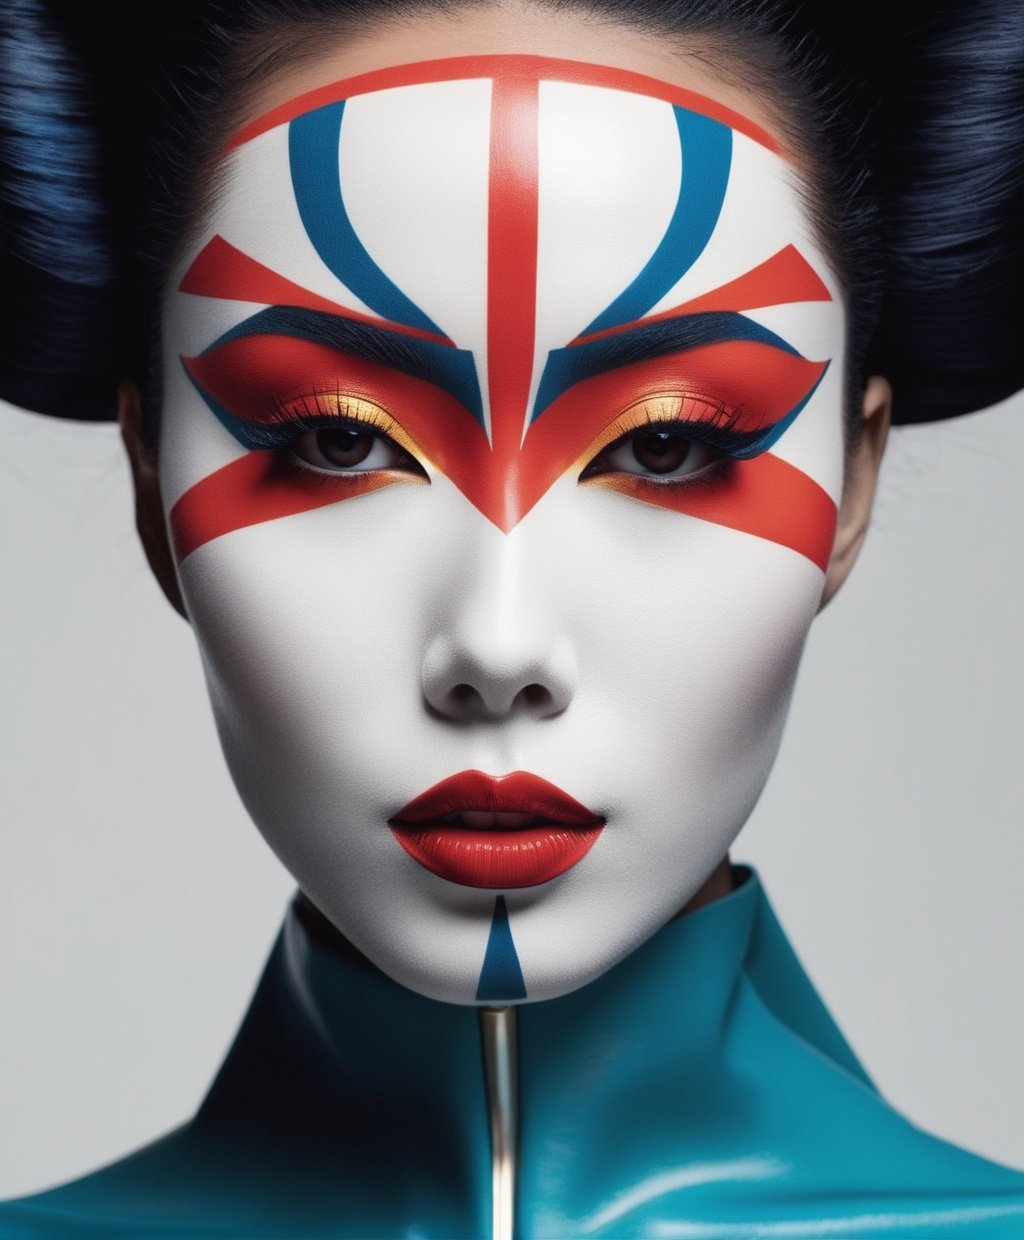 crossed colors, in the style of modern and sleek, in the style of twisted afrofuturism design, bold color combinations, minimal retouching, geisha, symmetrical harmony  minimalist beauty, body art, minimalistic Japanese cultural themes, harmonious coloration, exaggerated facial features, porcelain makeup on her face, symmetrical design